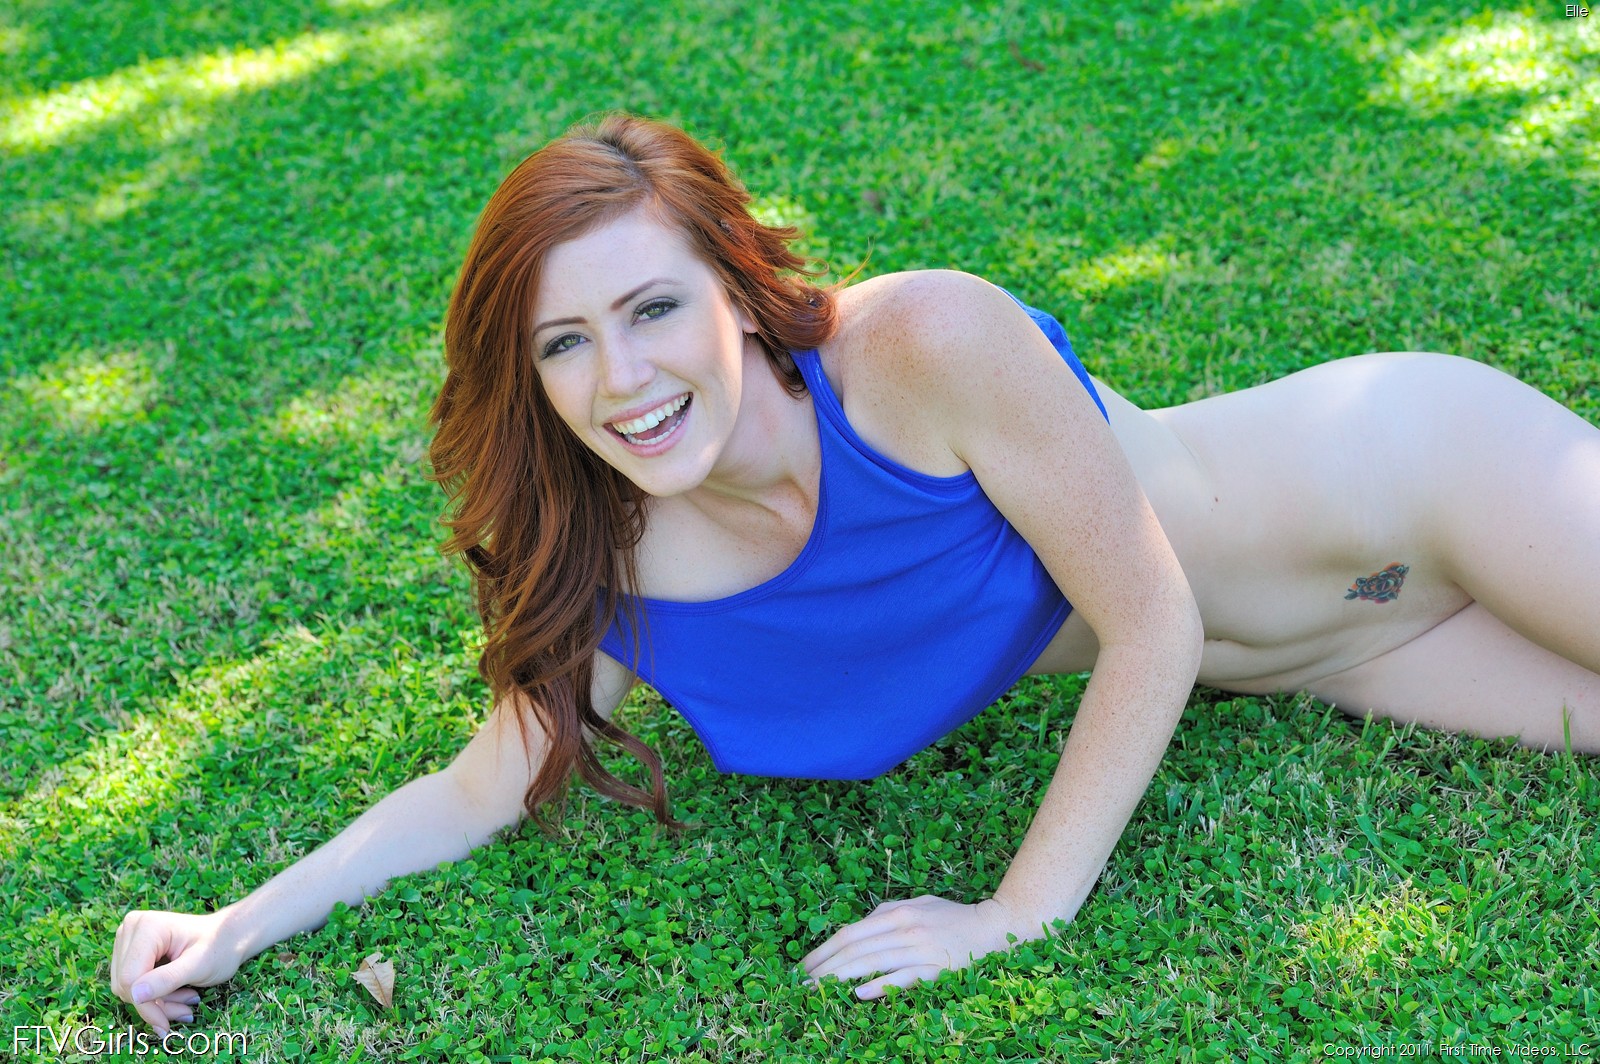 Elle Alexandra in Redheads have more fun - Flexible One photo 80 of 82